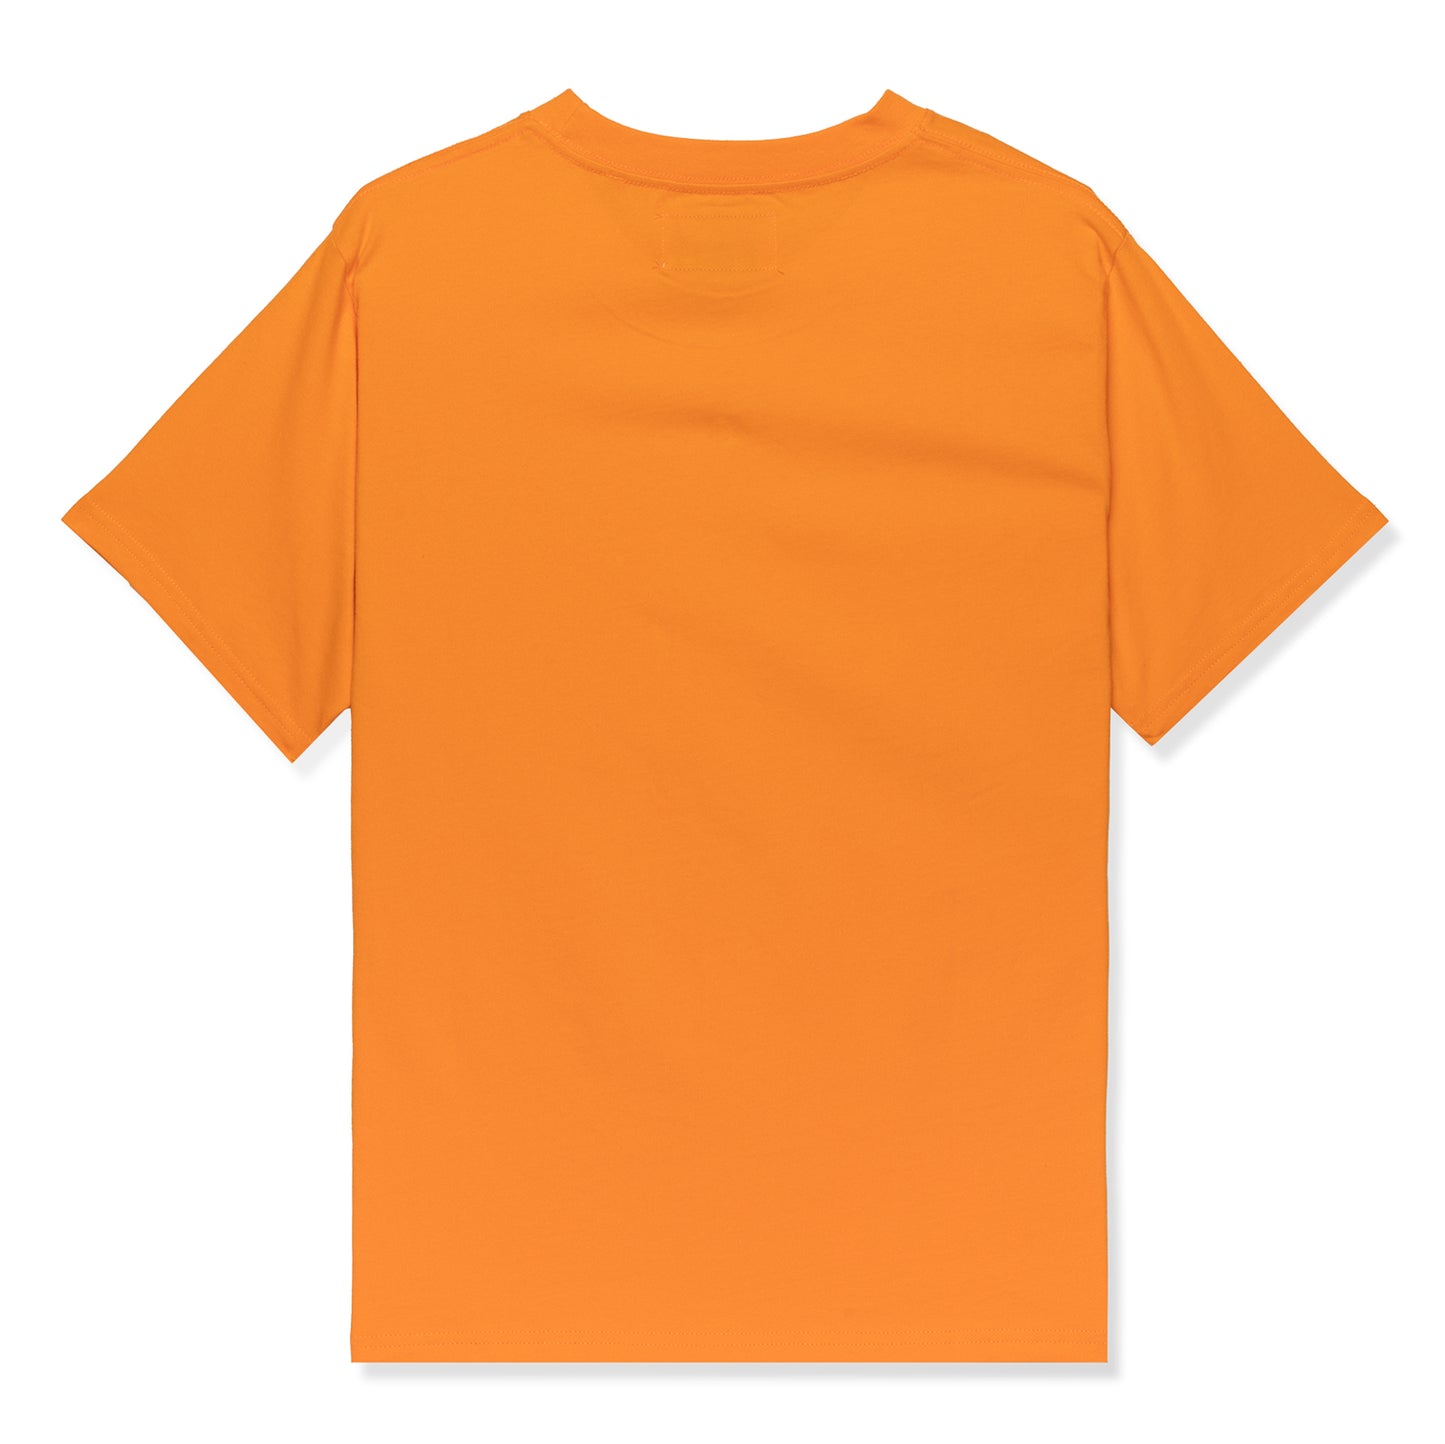 Stingwater Aapi and Aya Unchained T-Shirt (Orange) – CNCPTS